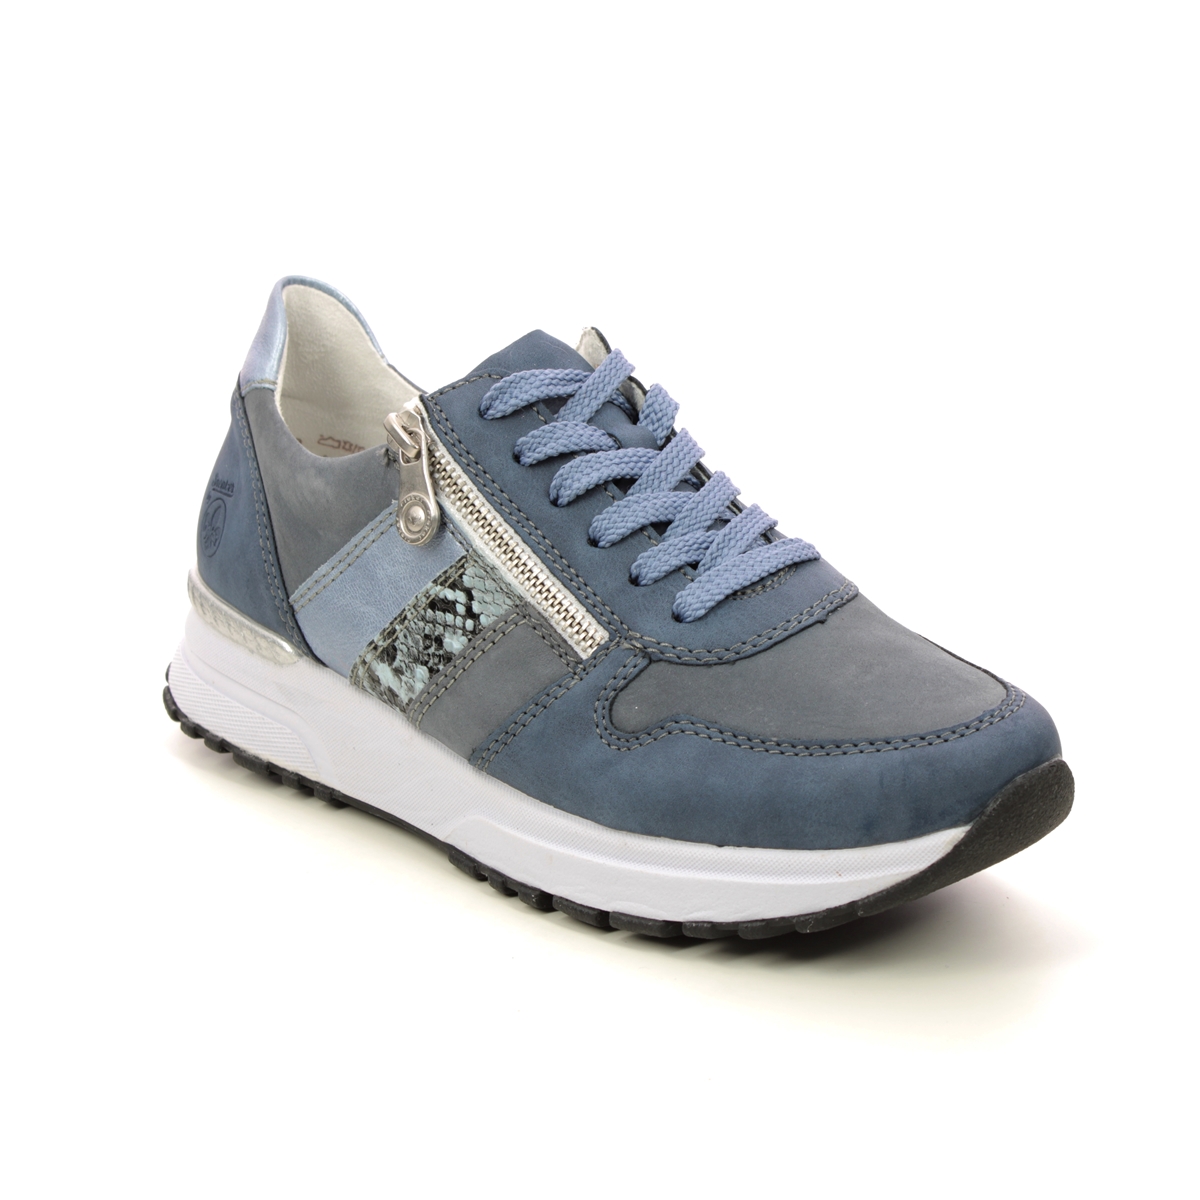 Rieker Govict Denim Leather Womens Trainers N7421-14 In Size 40 In Plain Denim Leather